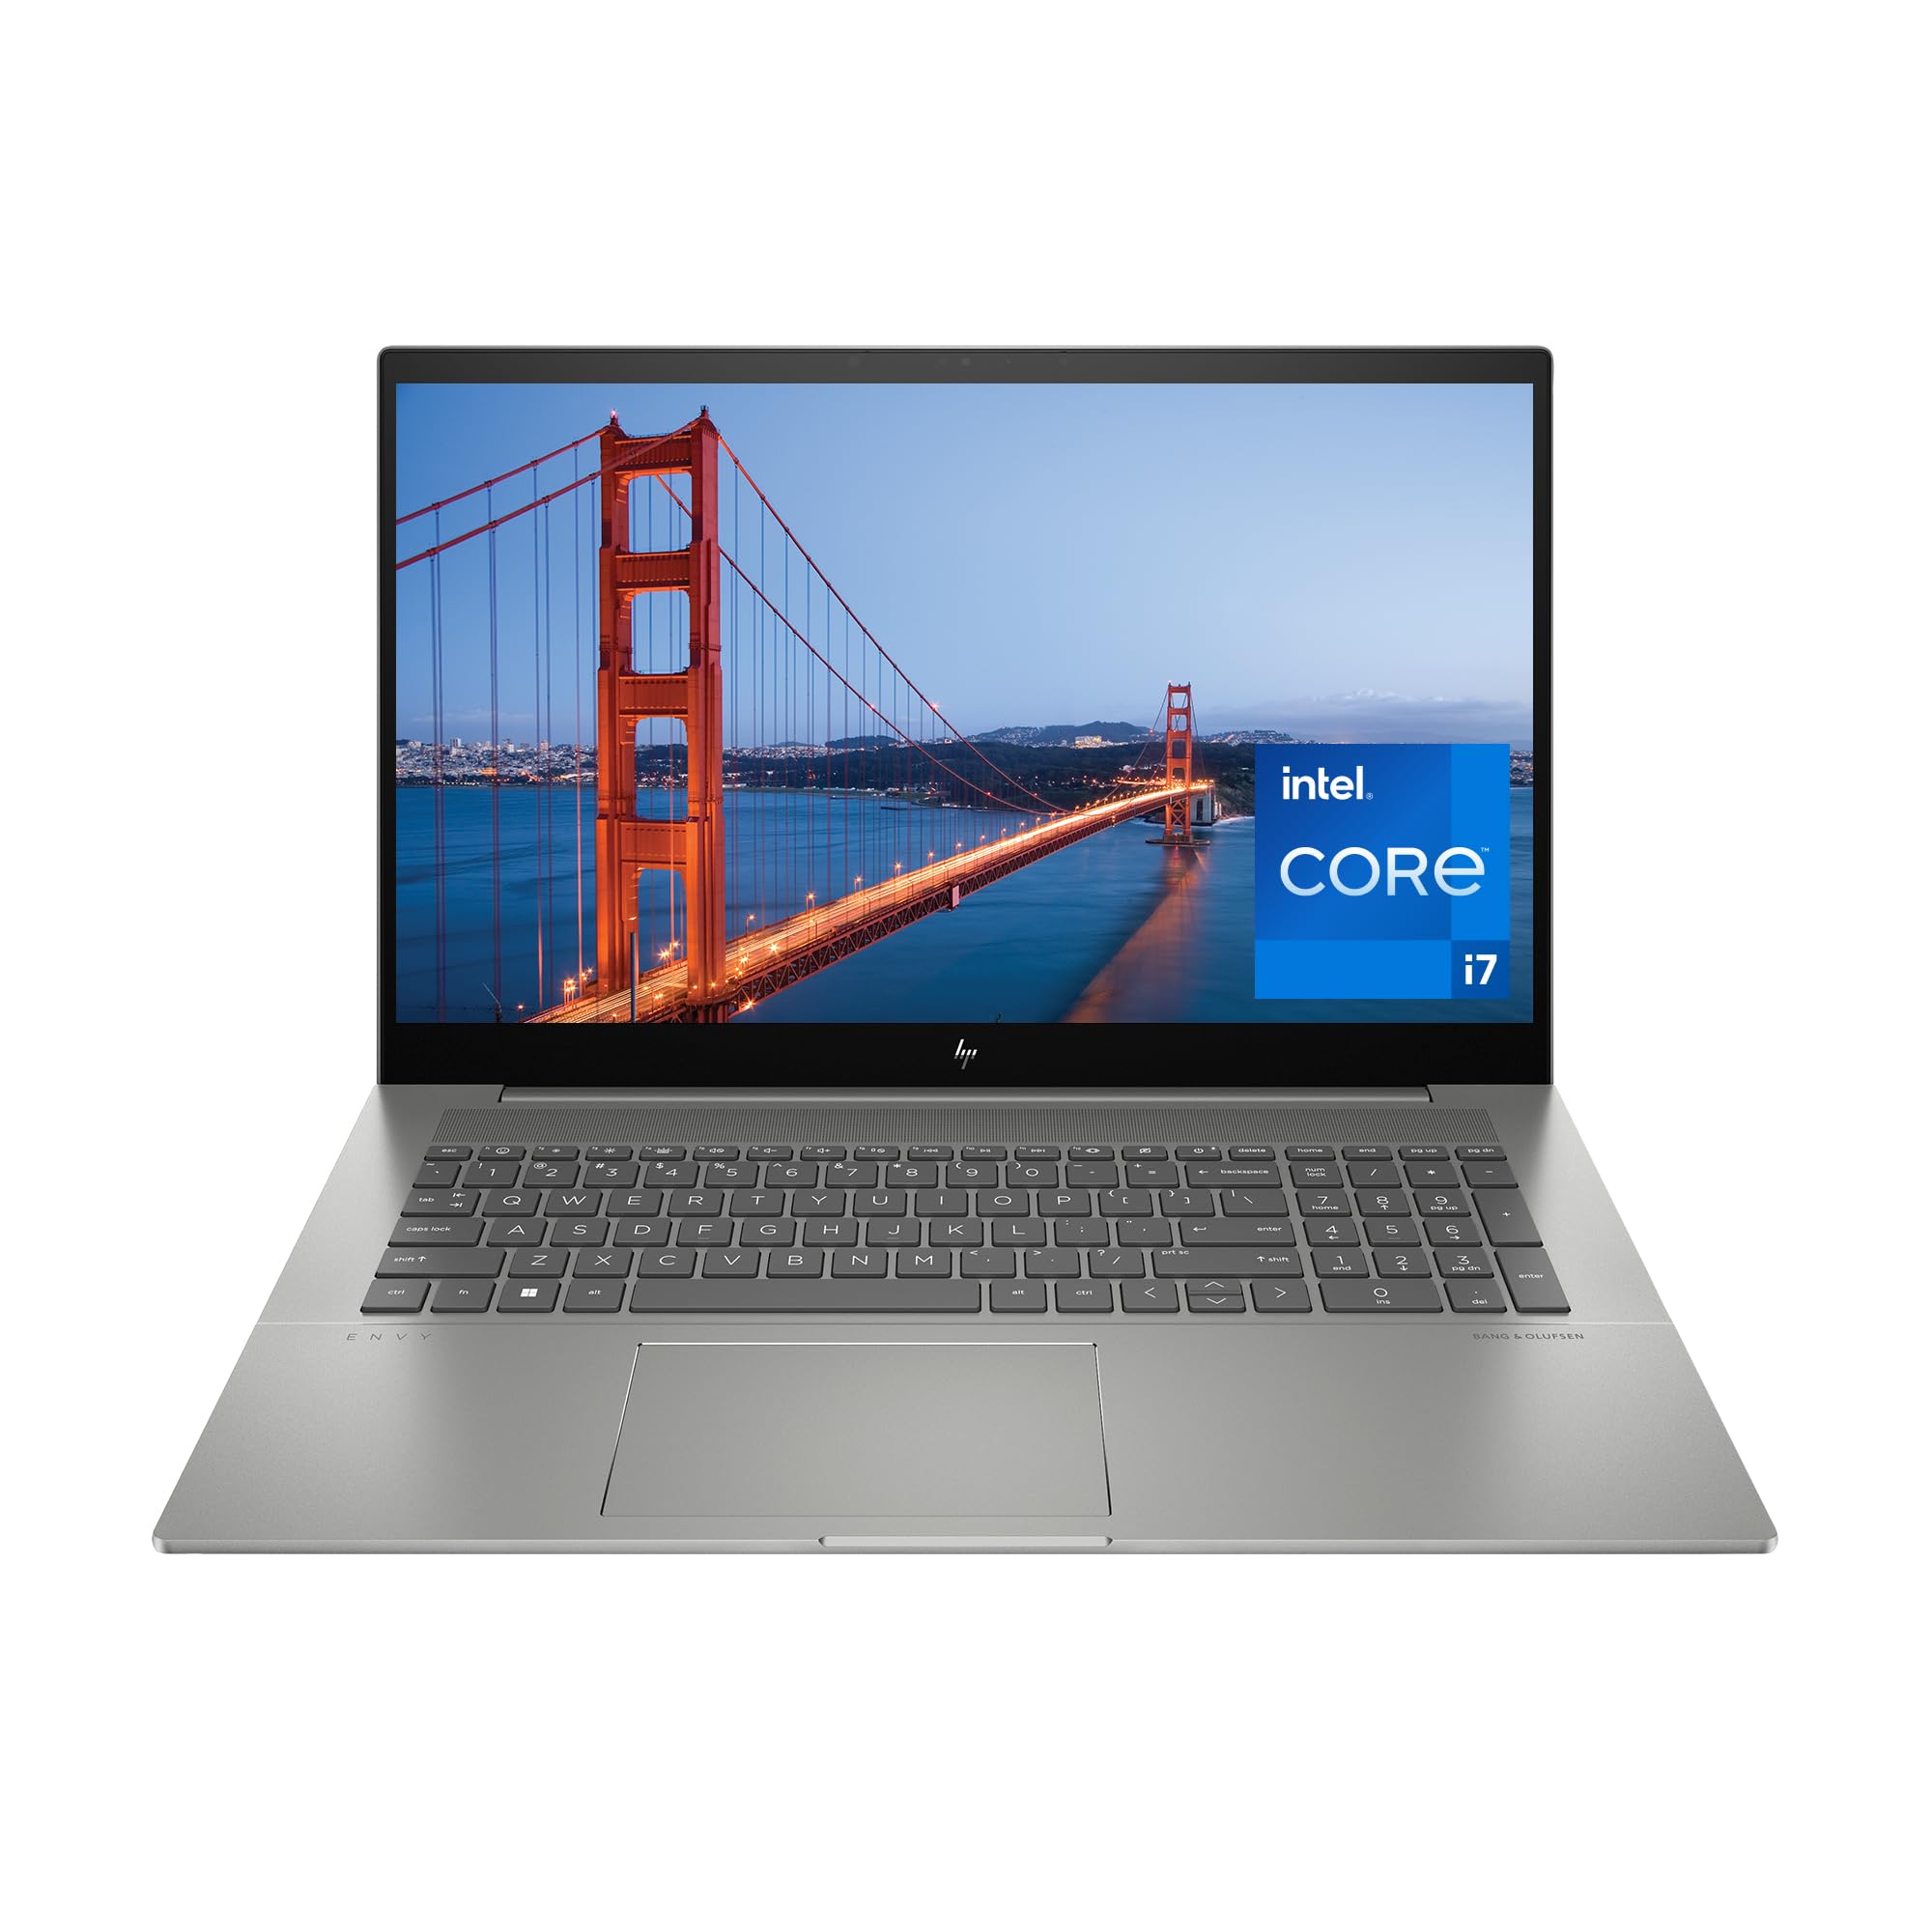 ENVY 17-r000 Notebook PC (Touch)